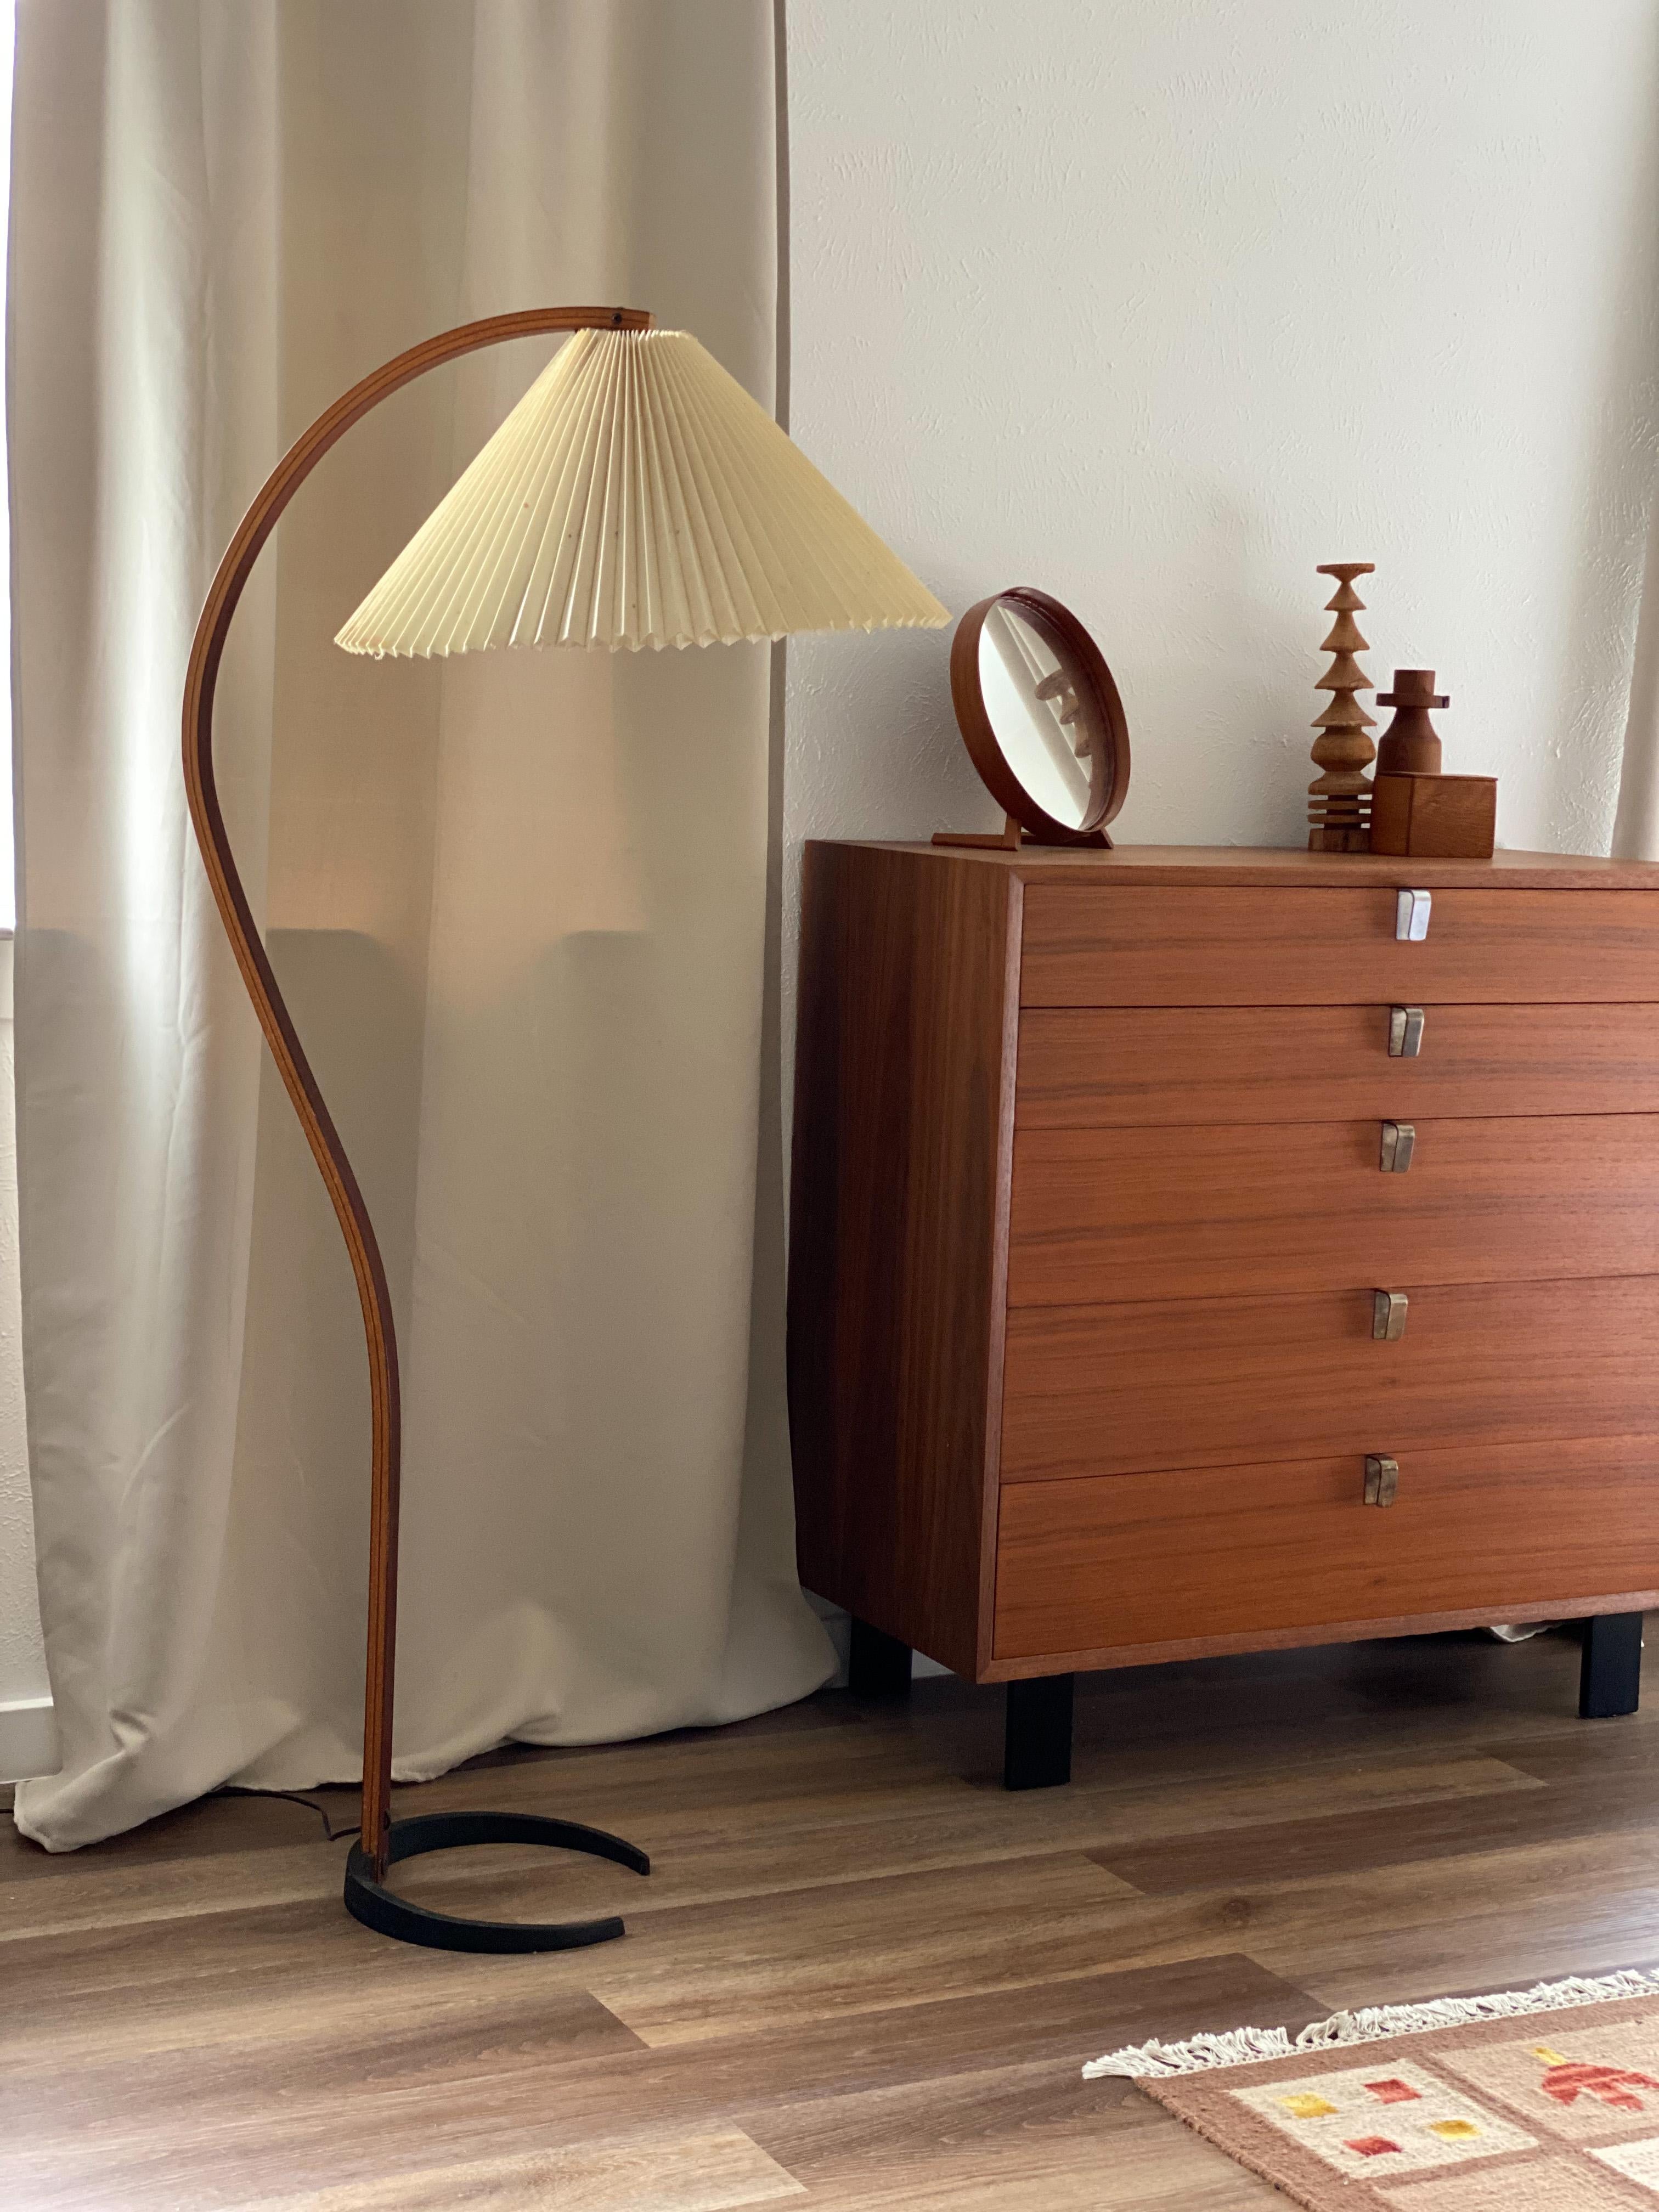 Early sculptural teak floor lamp designed by Mads Caprani Denmark, c. 1971. Iconic organic bentwood design complimented by its soft lighted pleated shade and crescent iron base. The shade is original and has staining, fraying and creases. We tried